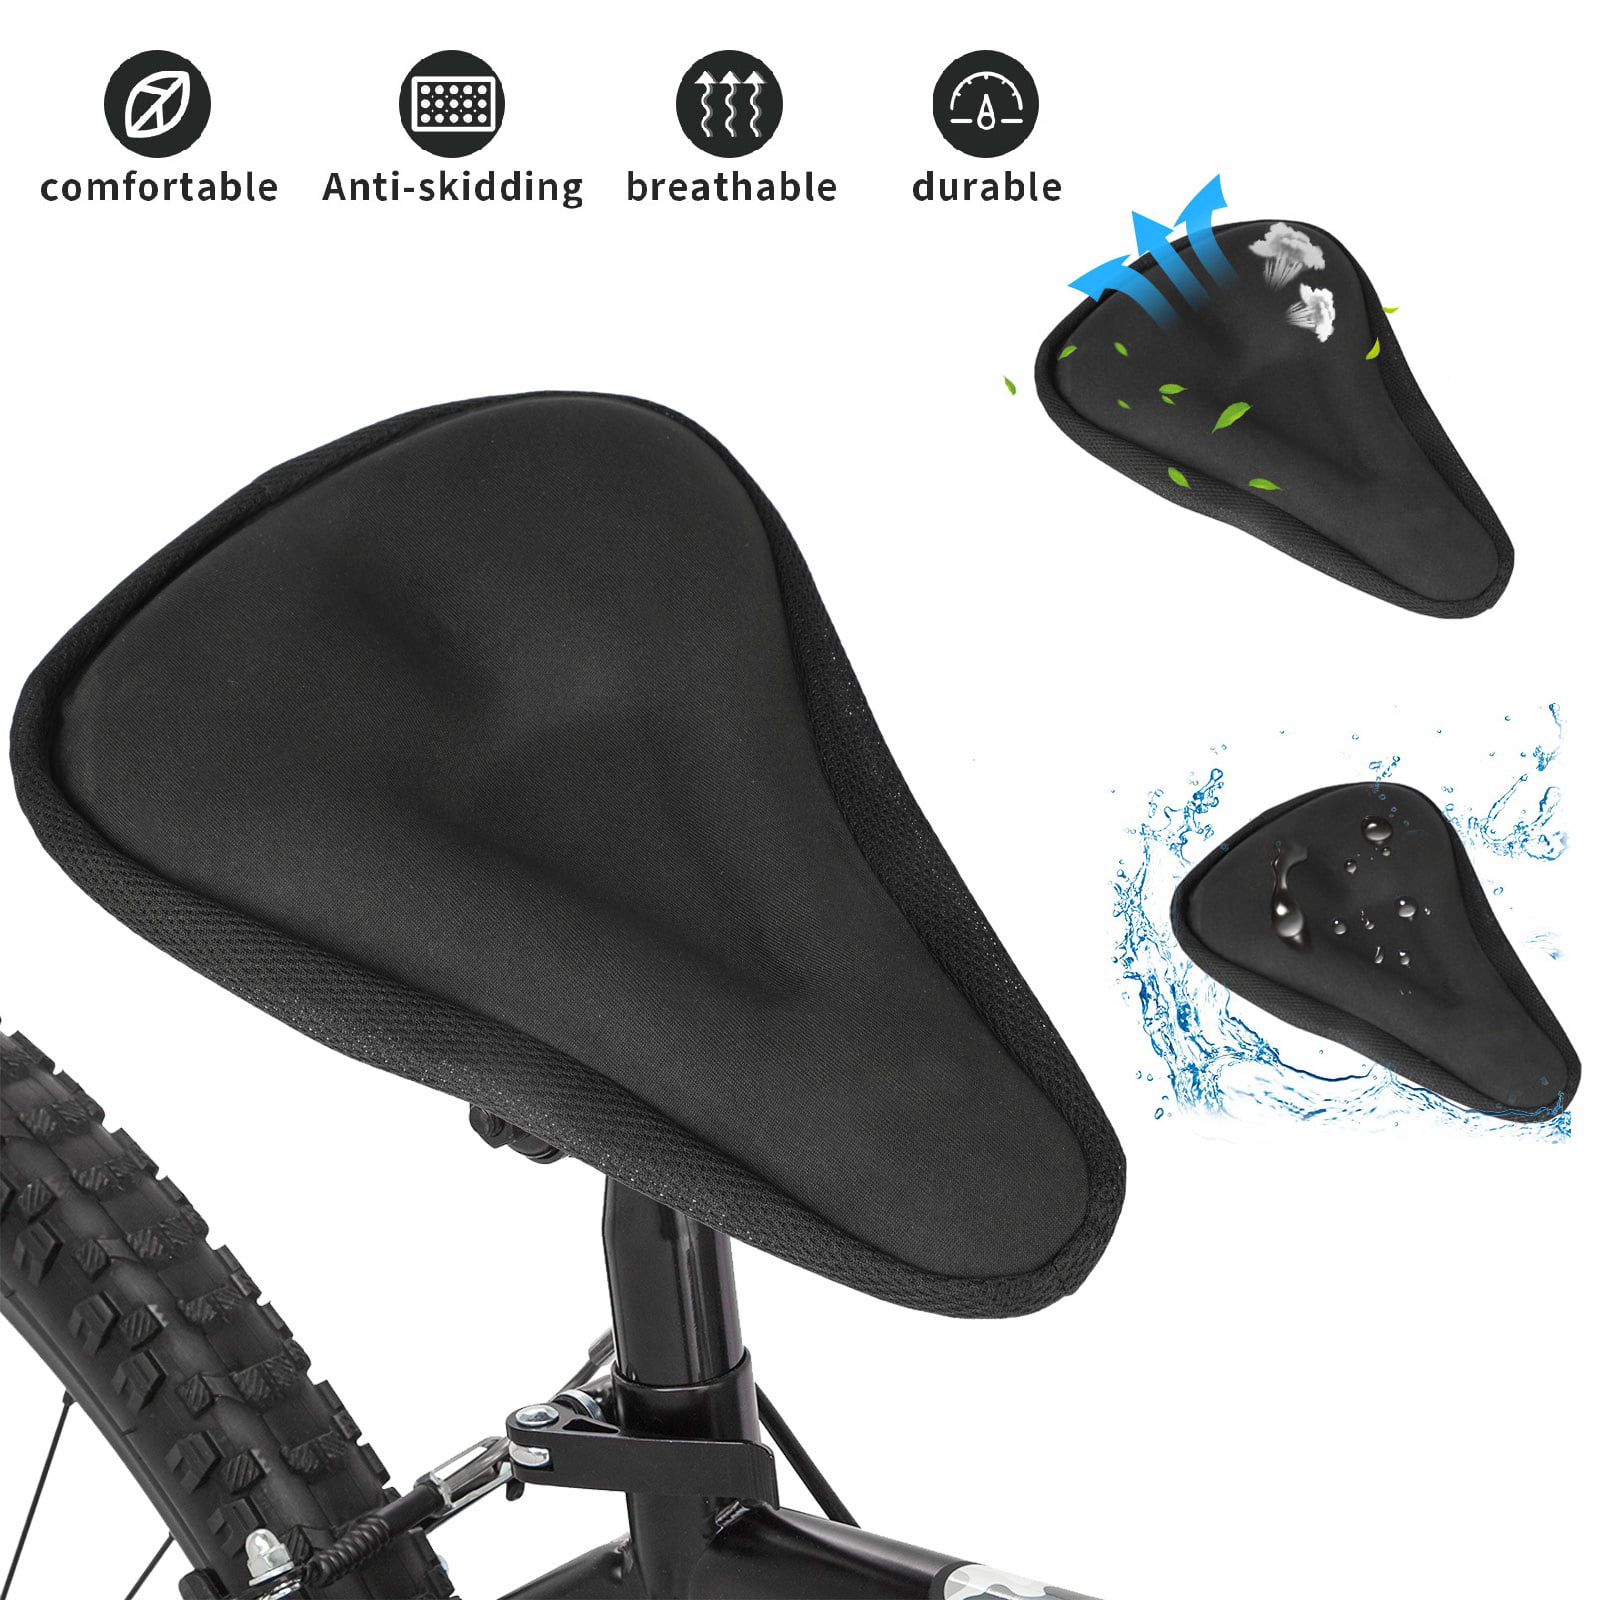 Free-fly Large Bike Seat Cushion with Drawstring- Extra Soft Gel Bicycle Seat Fits Cruiser and Stationary Bikes Non-Slip Bike Seat Pad Cover Black Indoor Cycling 